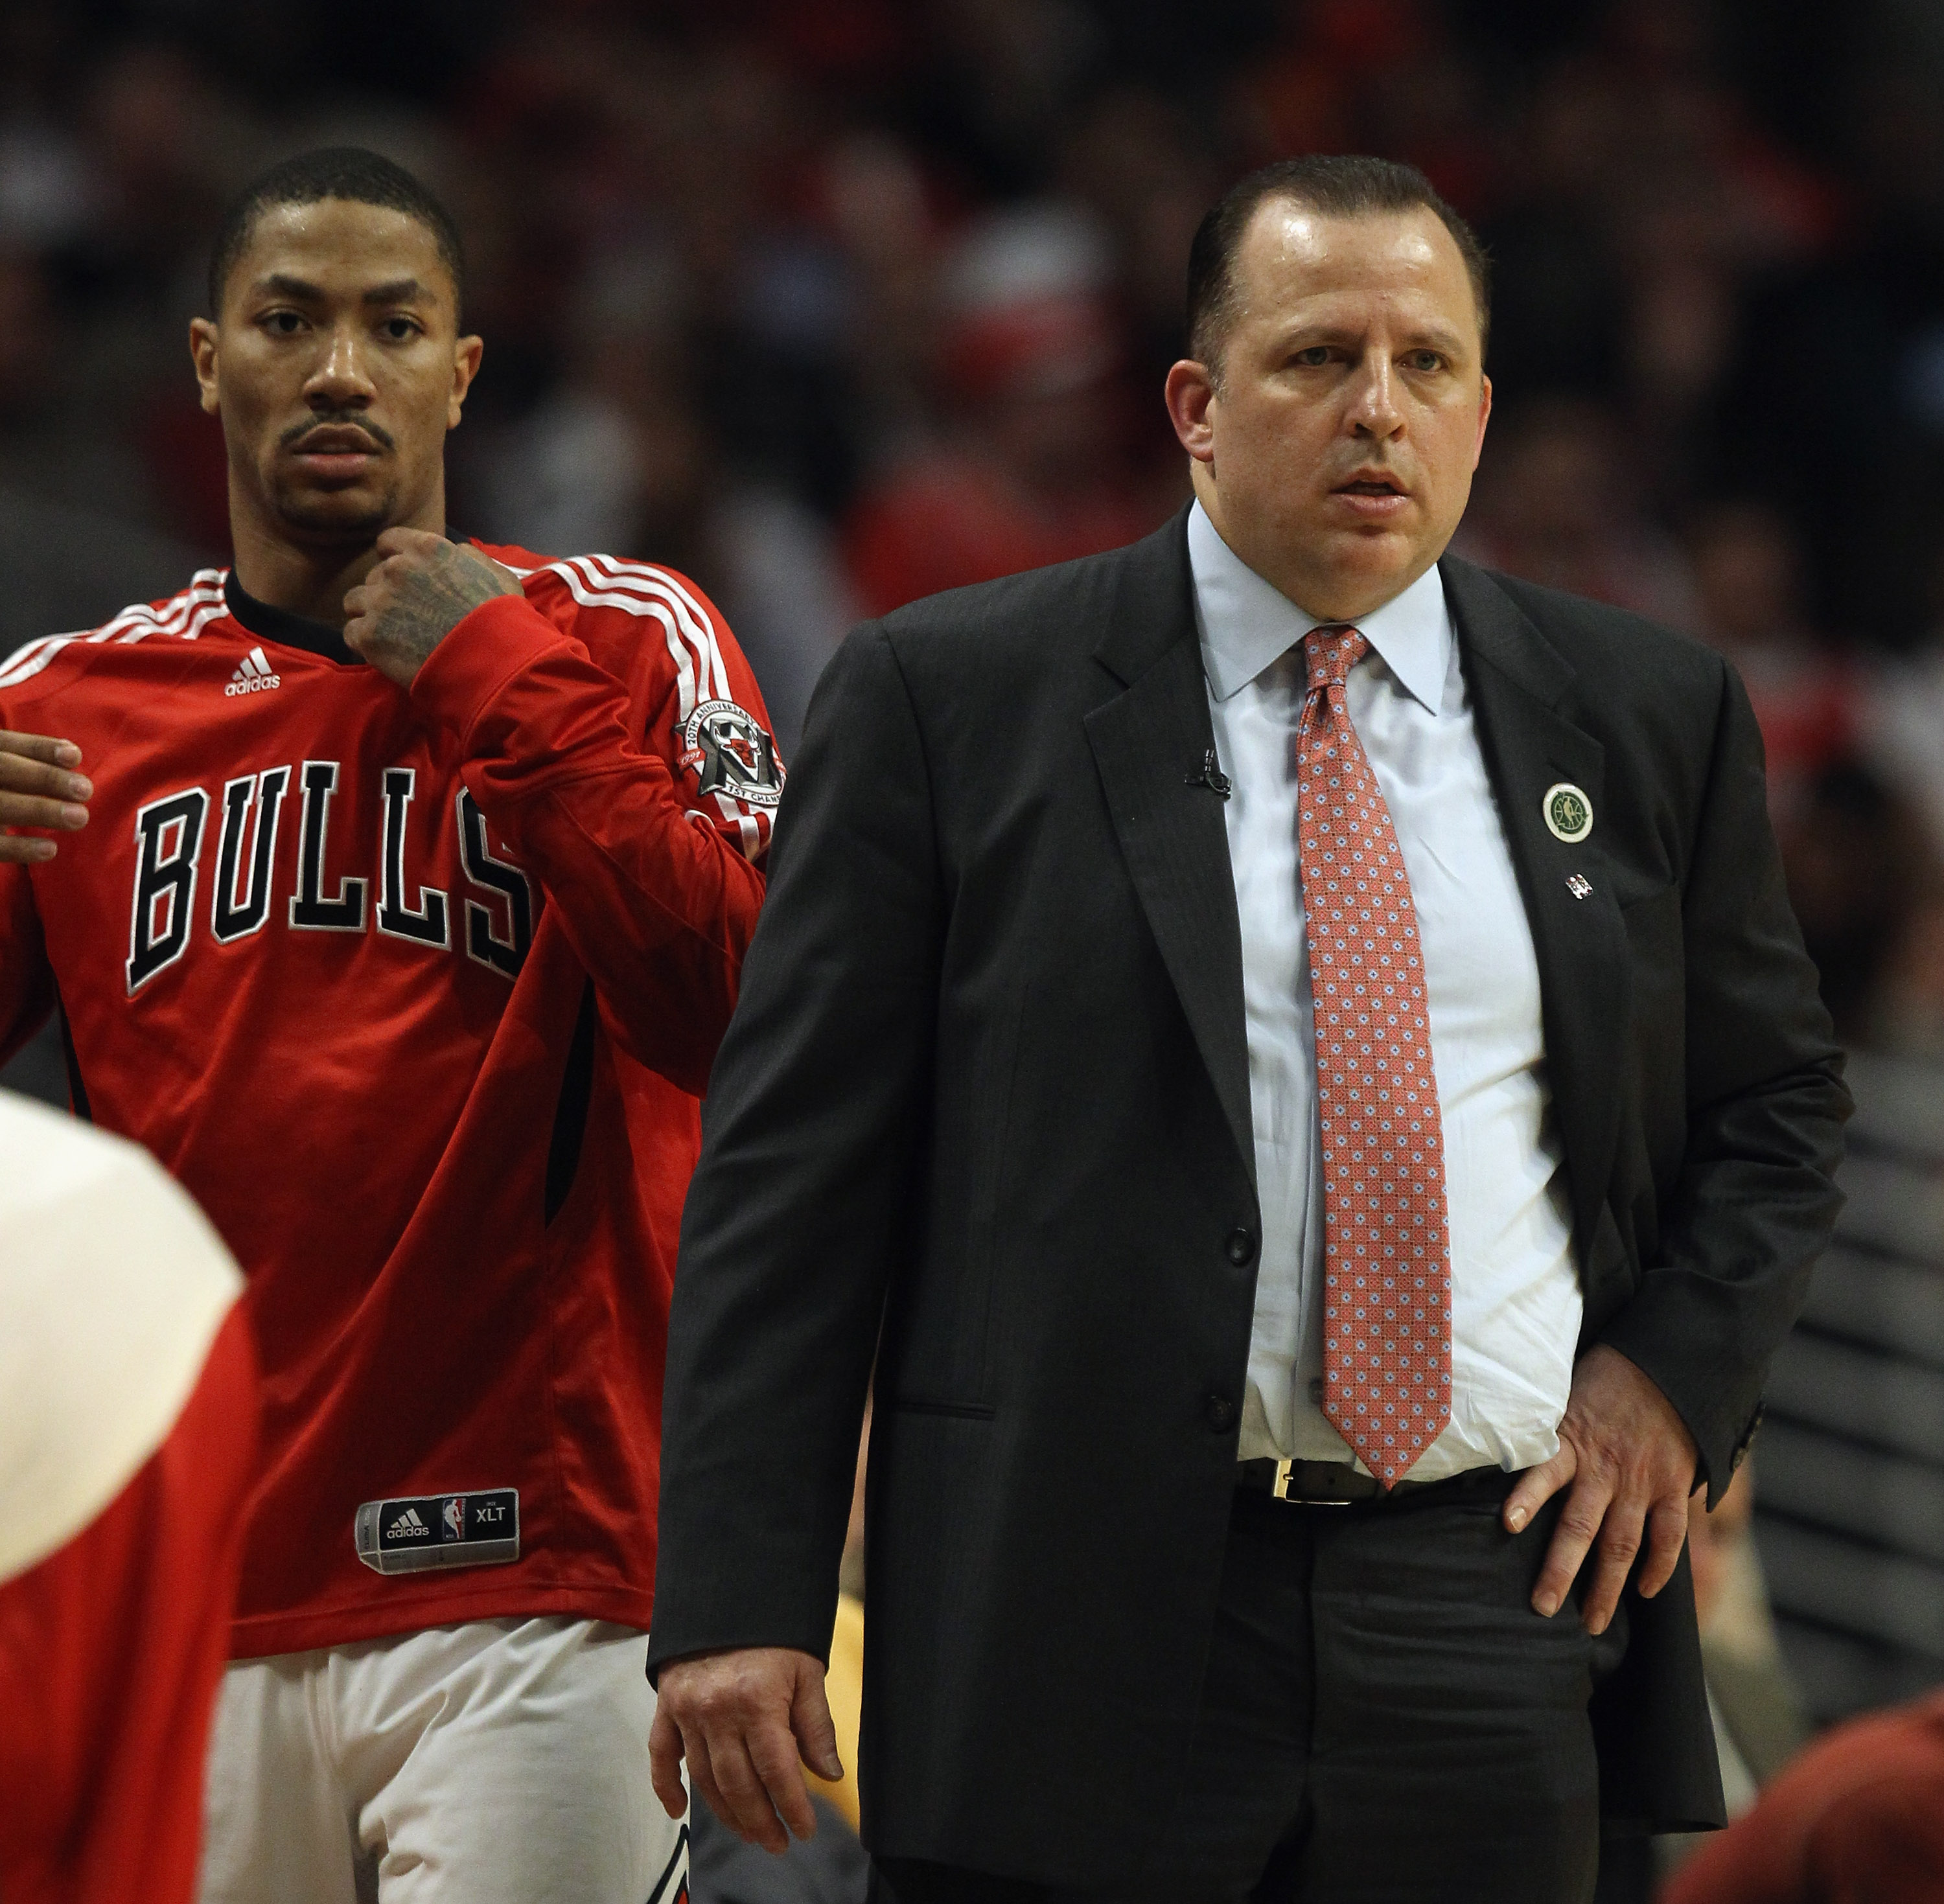 CHICAGO, IL - APRIL 07: Head coach Tom Thibodeau of the Chicago Bulls watches his team as Derrick Rose #1 moves to re-enter a game against the Boston Celtics at United Center on April 7, 2011 in Chicago, Illinois. The Bulls defeated the Celtics 97-81. NOT